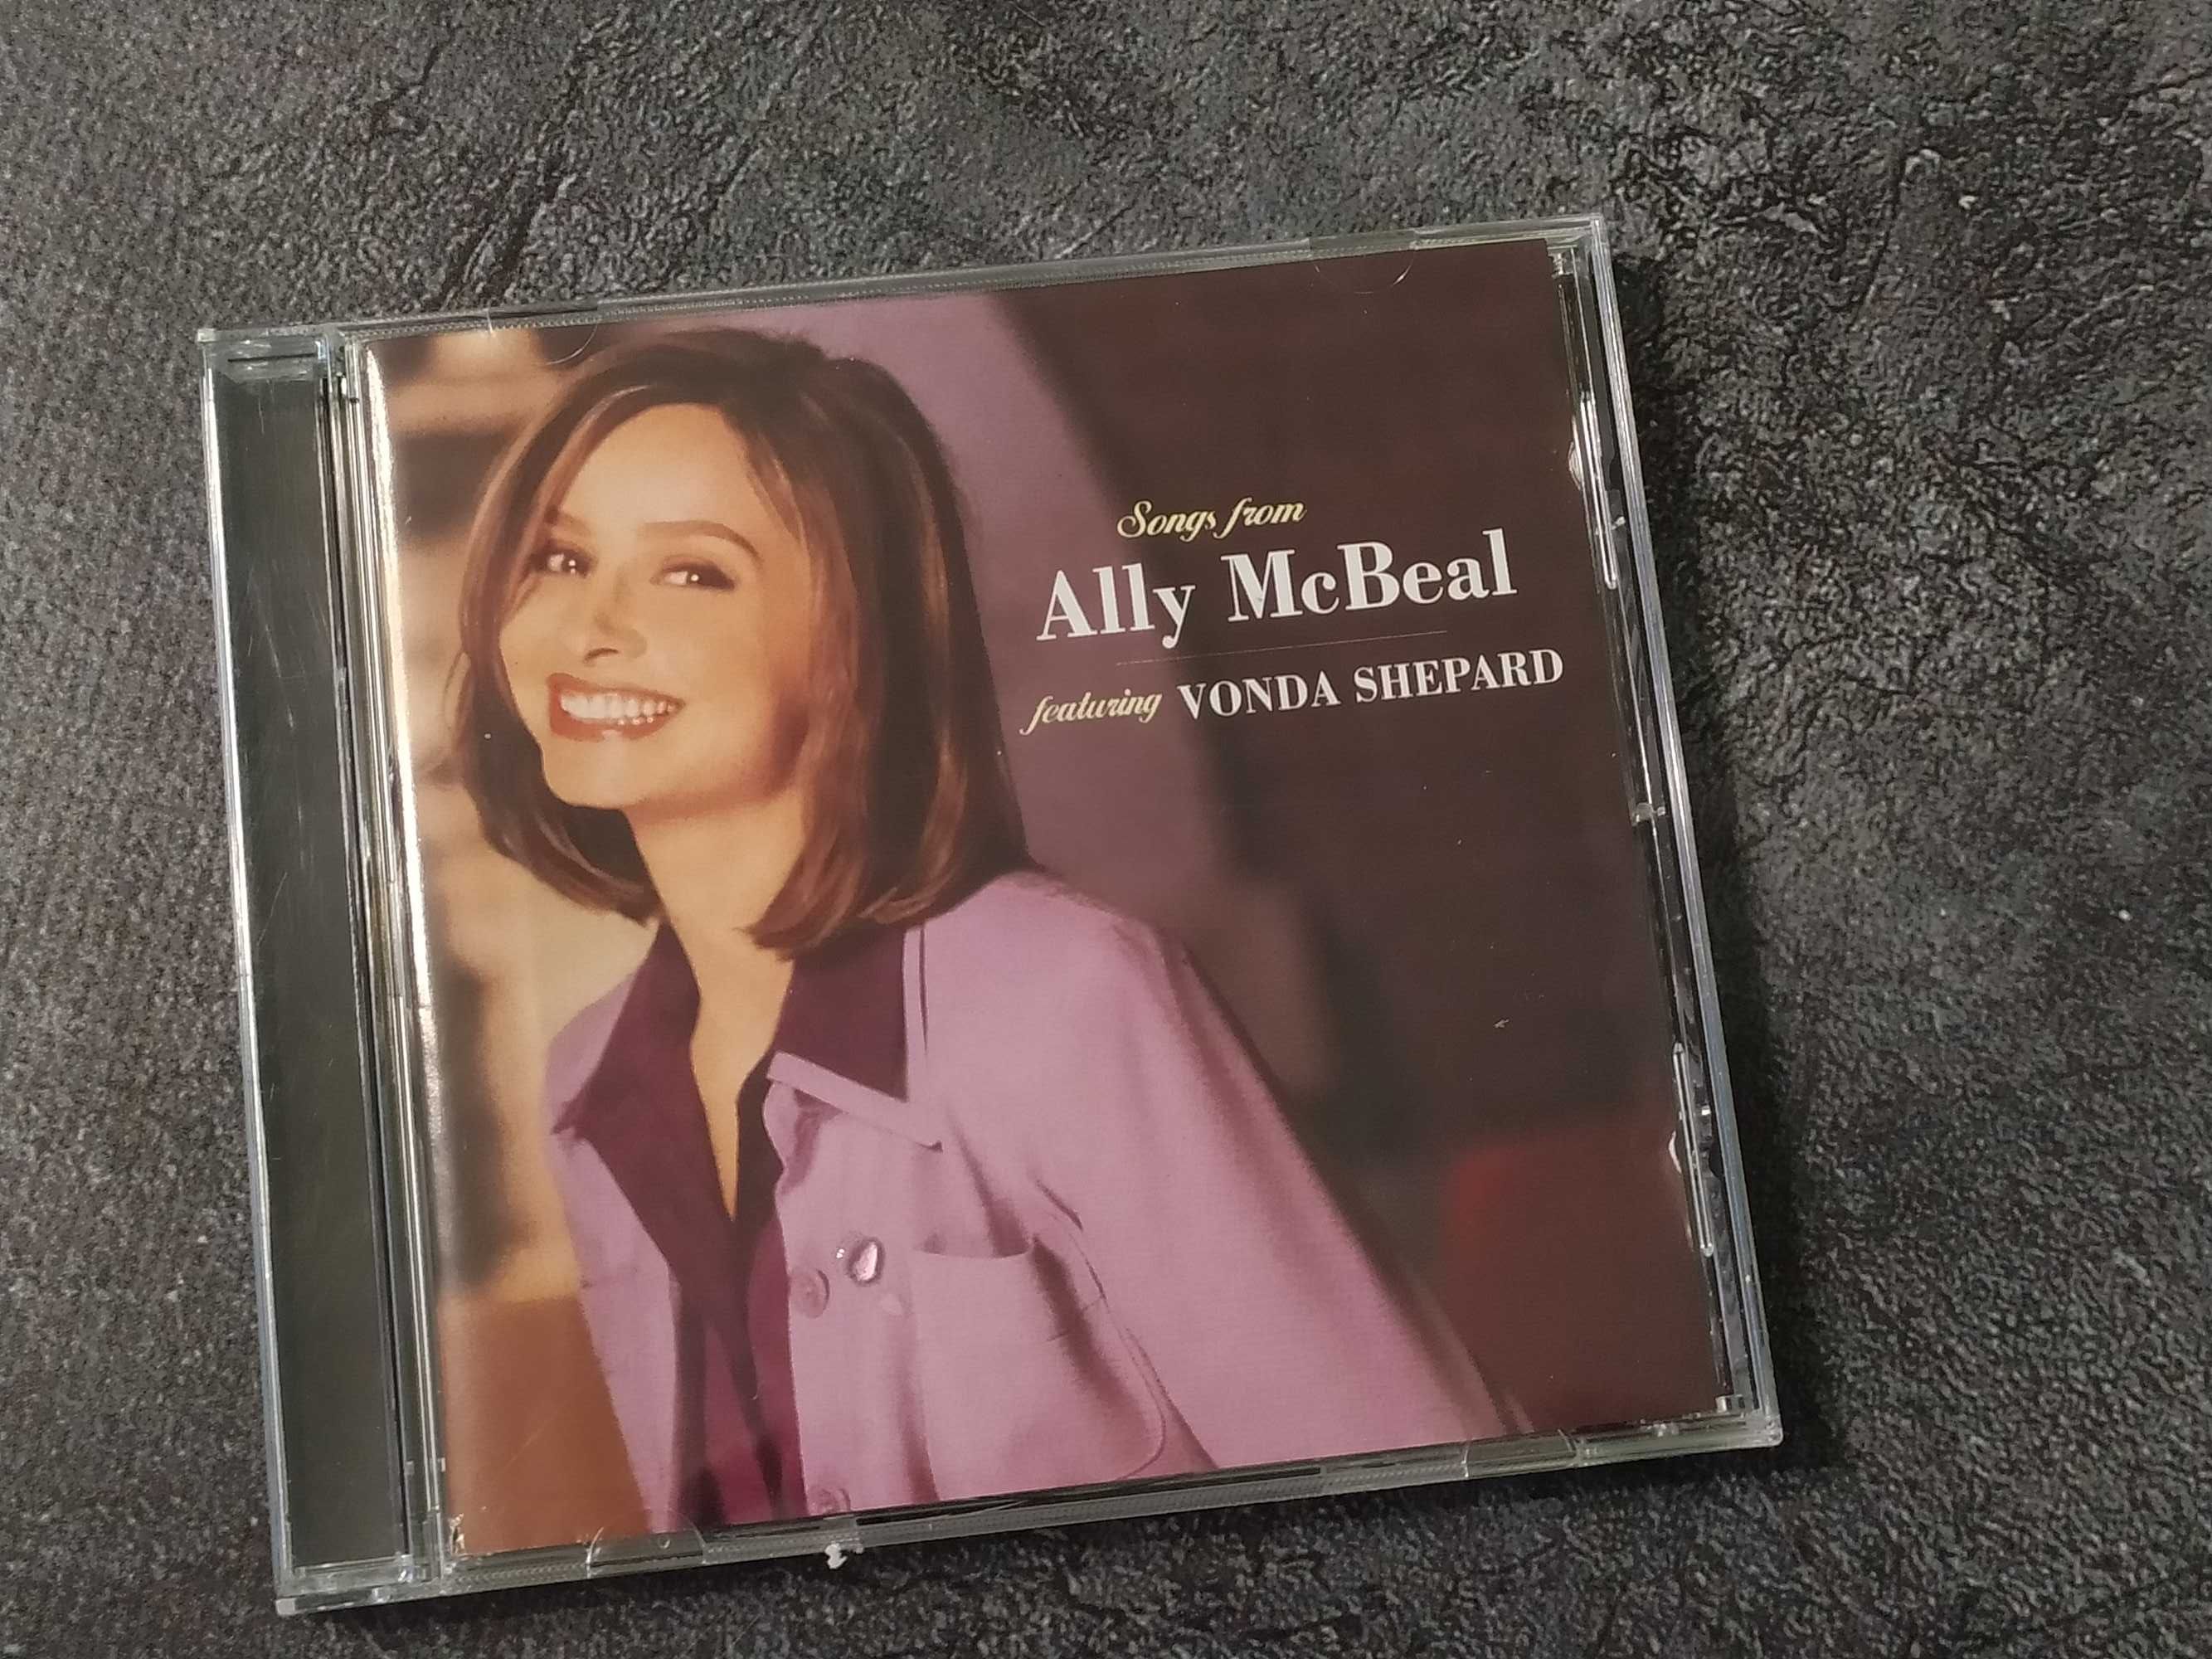 Songs from Ally McBeal featuring Vonda Shepard OST -CD Wrocław